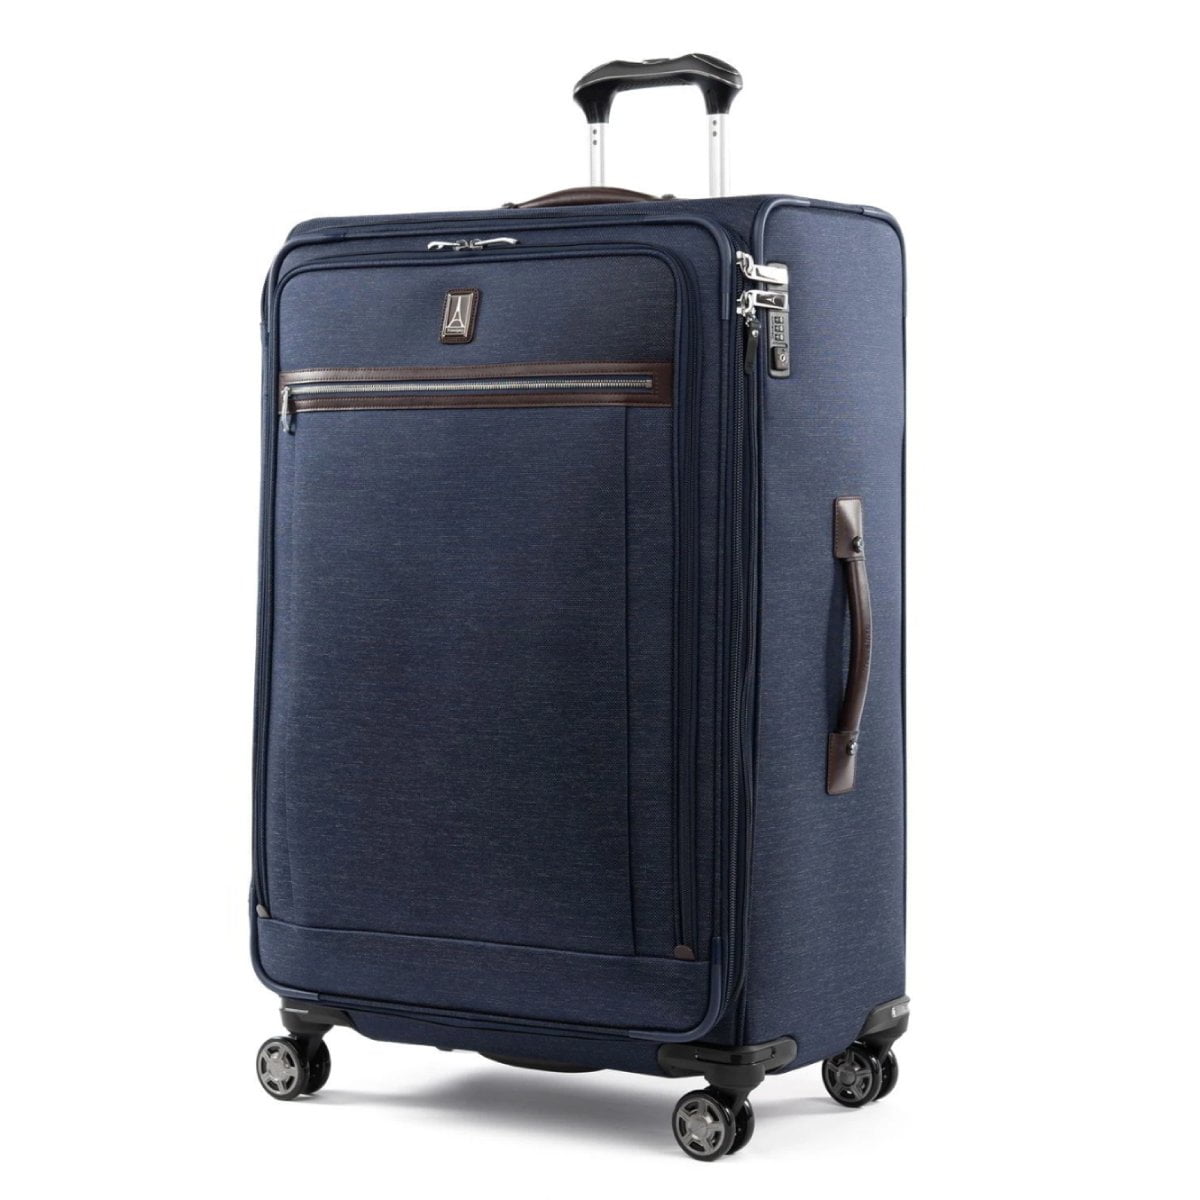 Travelpro Platinum Elite 29 Inch Expandable Spinner Luggage - True Navy